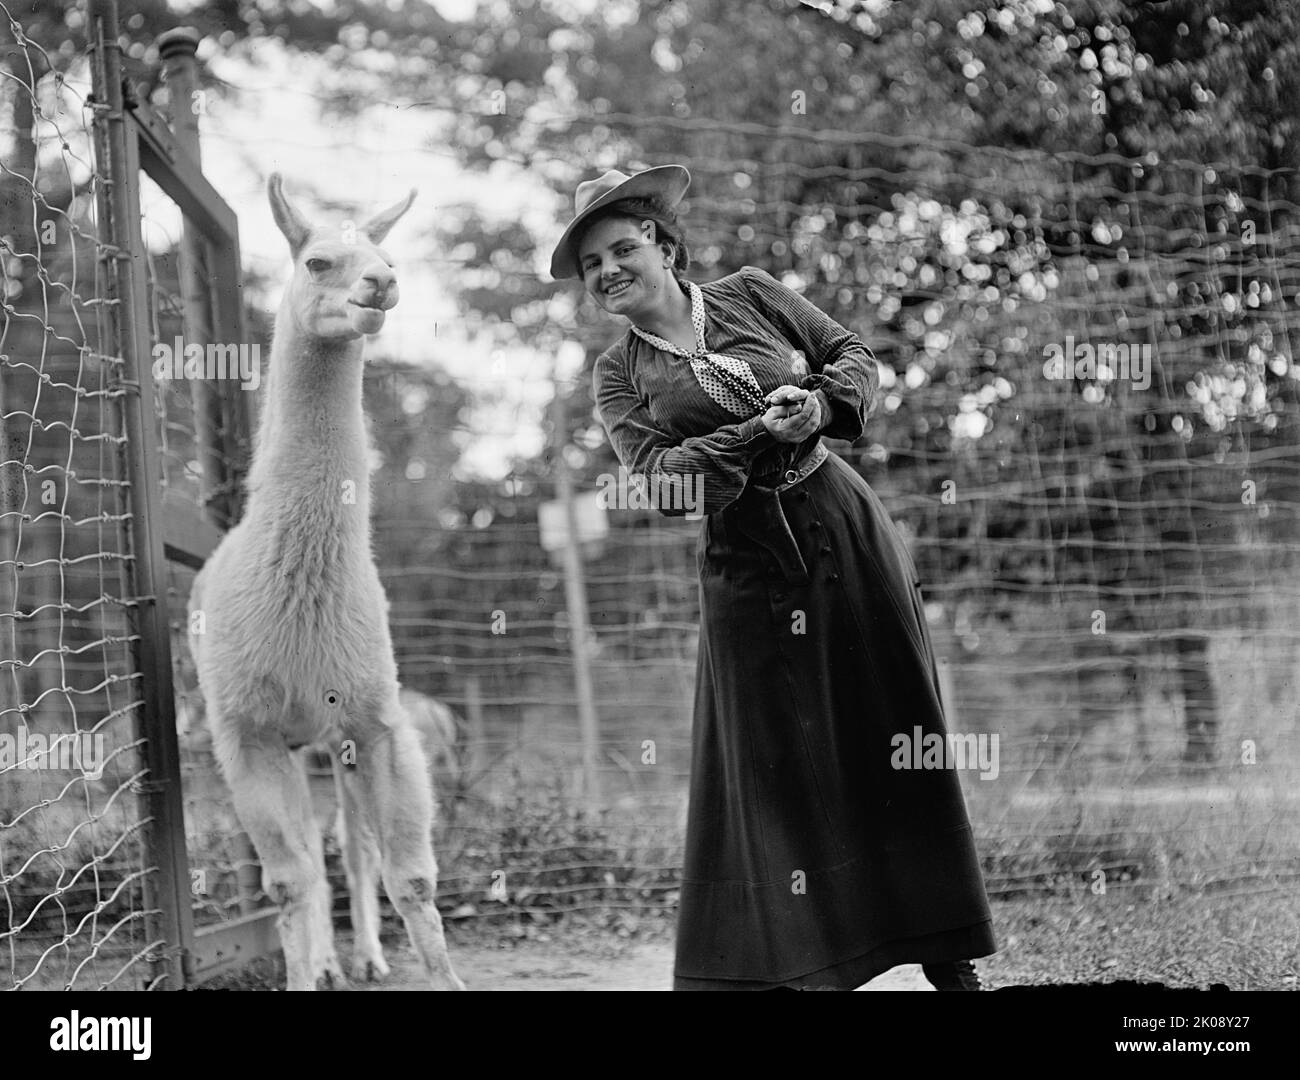 Mrs. Franklin Adams, nee Harriet Chalmers, at Zoo with Llama, 1912. [American explorer, writer and photographer Harriet Chalmers Adams. She lectured frequently on her extensive travels in South America, Asia and the South Pacific, and illustrated her talks with colour slides and films. She also published accounts of her journeys in National Geographic magazine. Married to Franklin Pierce Adams]. Stock Photo